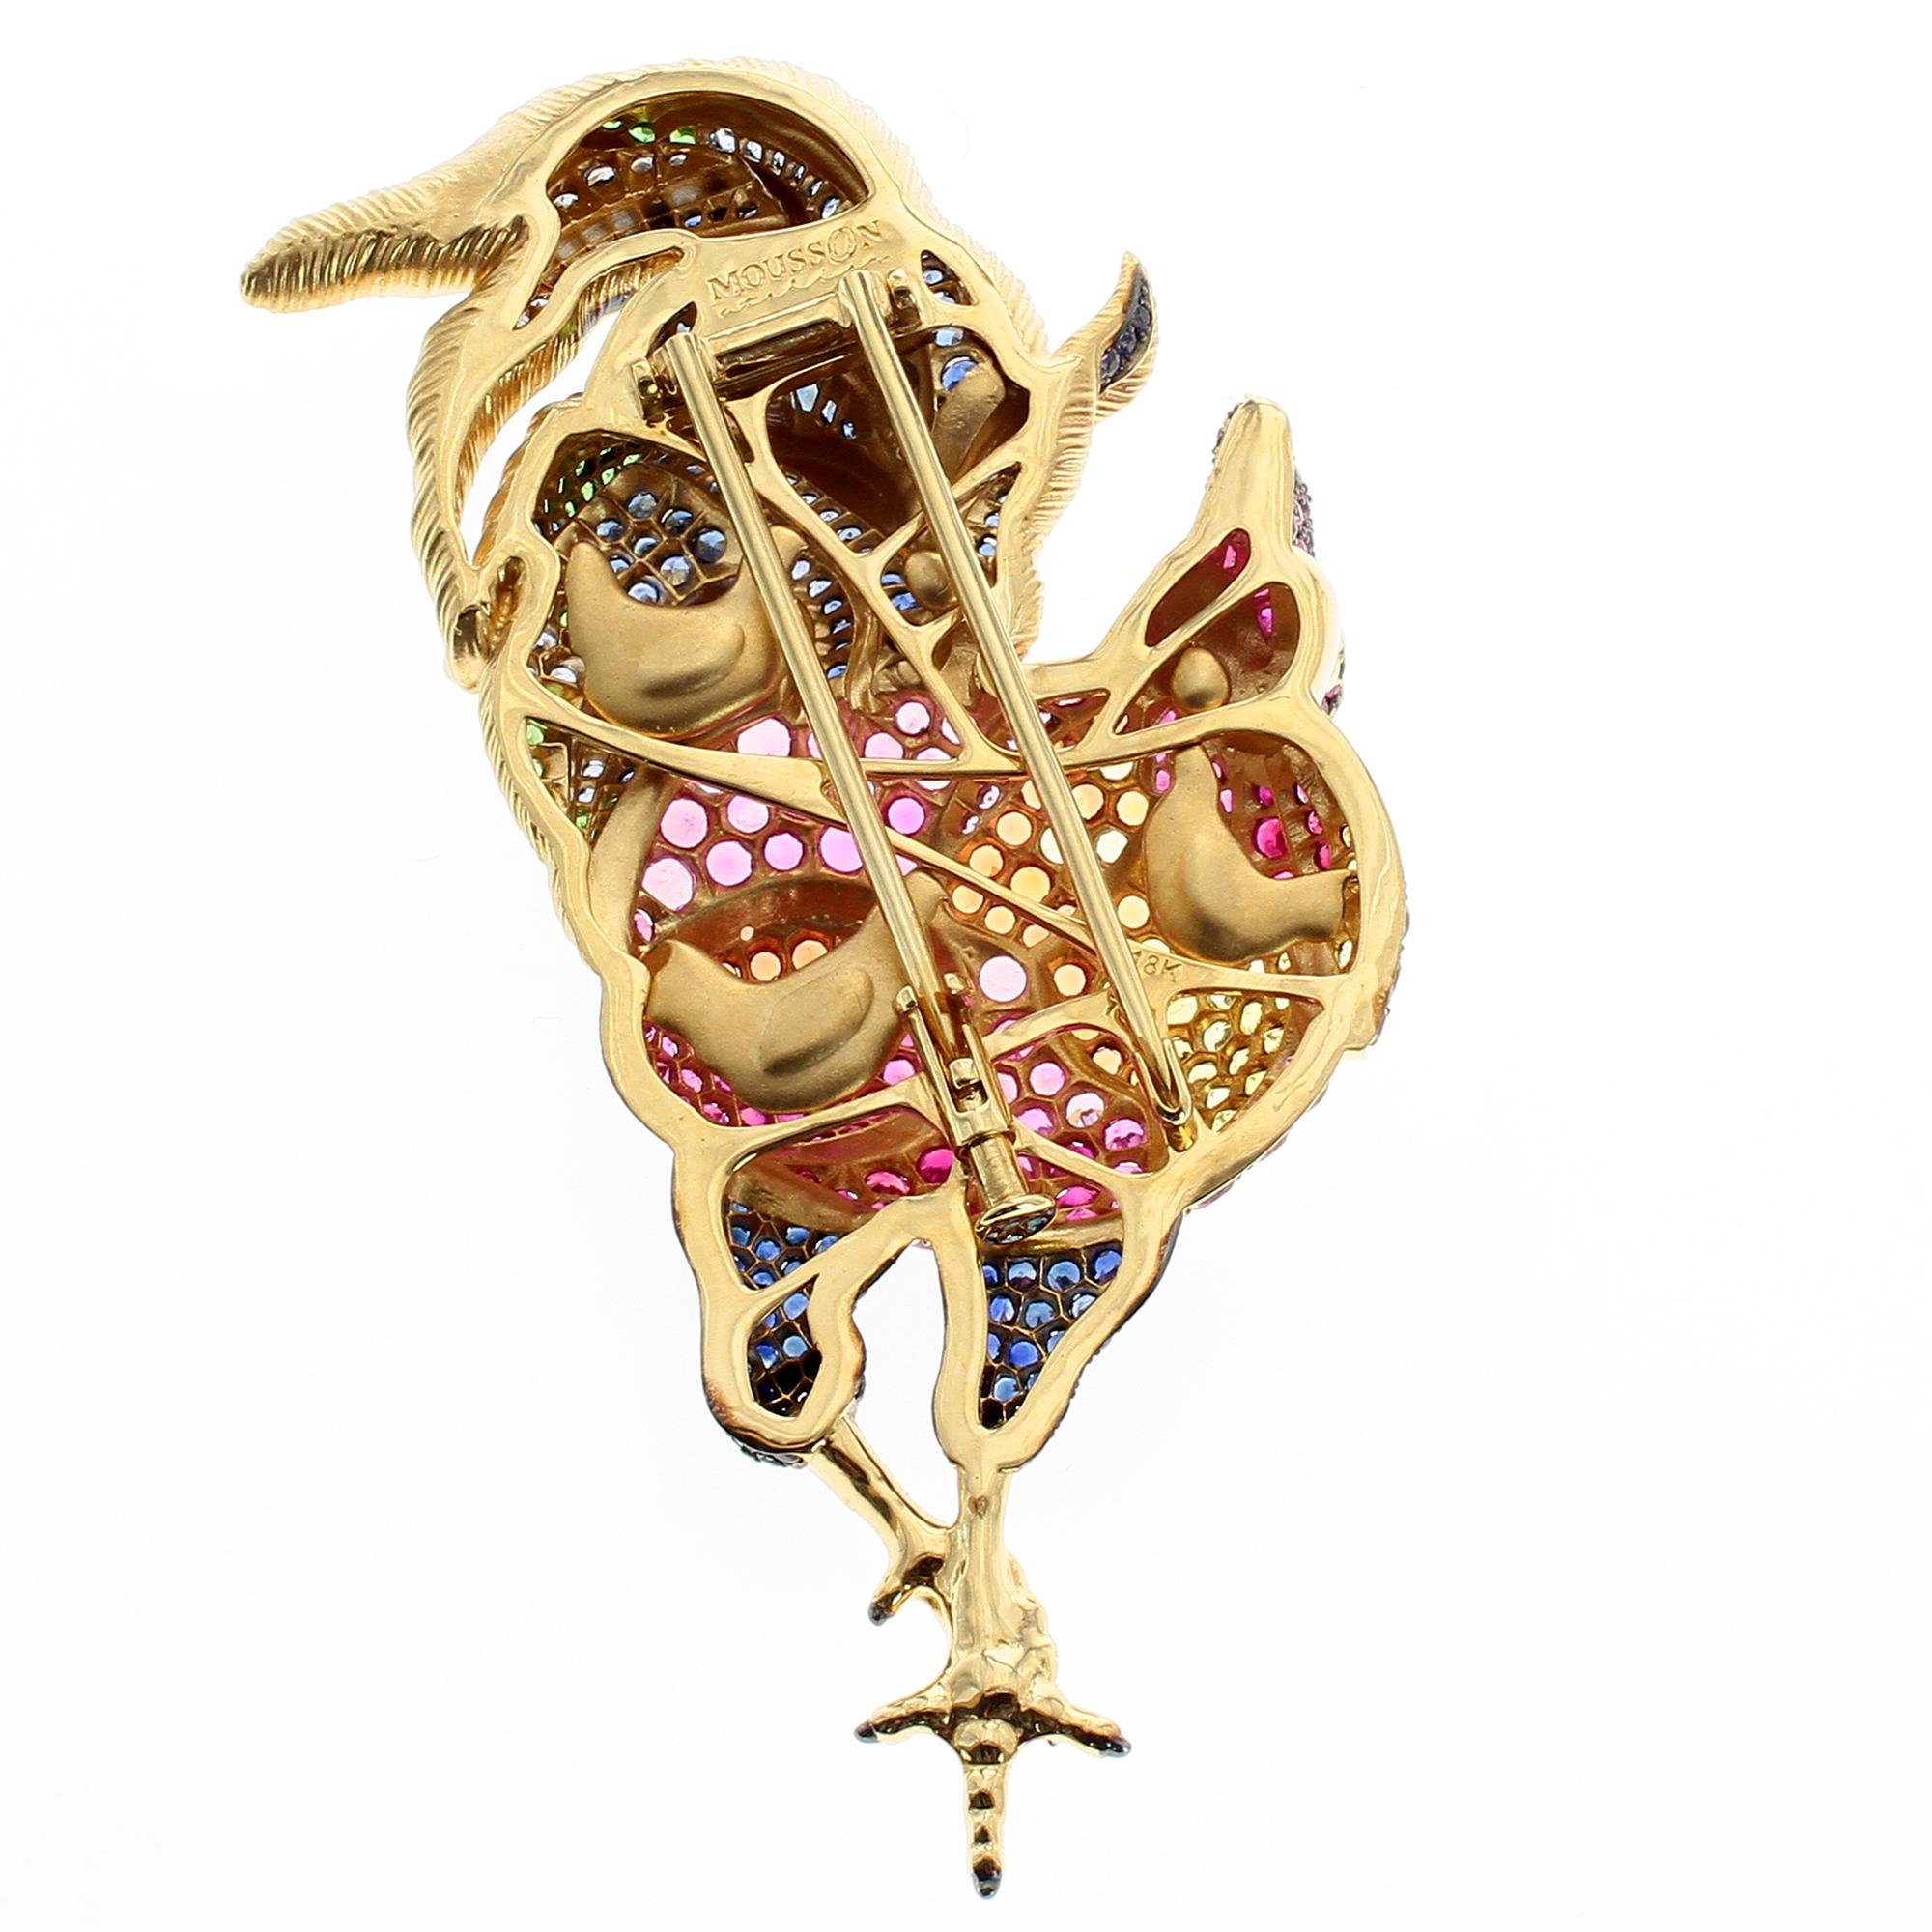 Multi-Color Sapphire 18 Karat Yellow Gold Rooster Brooch
The Body consists of Blue Sapphires, Pink Sapphires and Yellow Sapphires. The tail are hand engraved and set with tsavorites and Blue Sapphire. On the back side all his chicks are with him, as